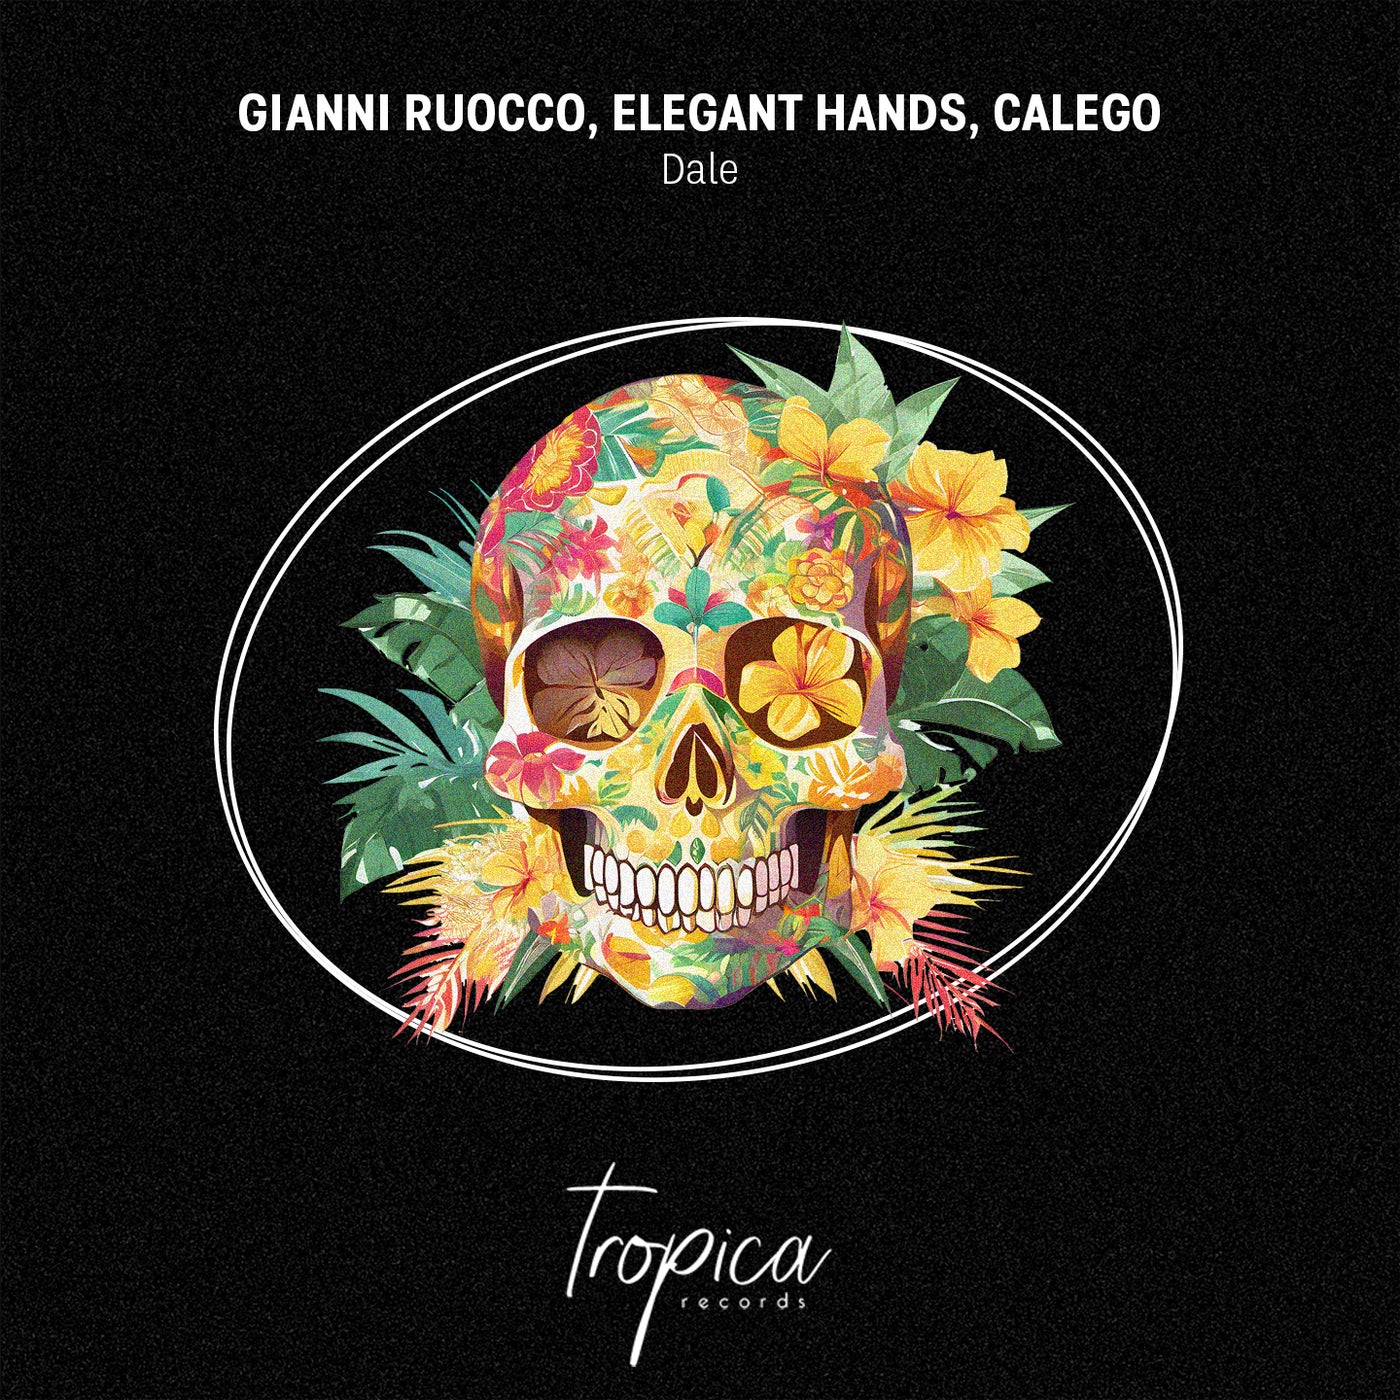 image cover: Gianni Ruocco, Elegant Hands, Calego - Dale on TROPICA RECORDS